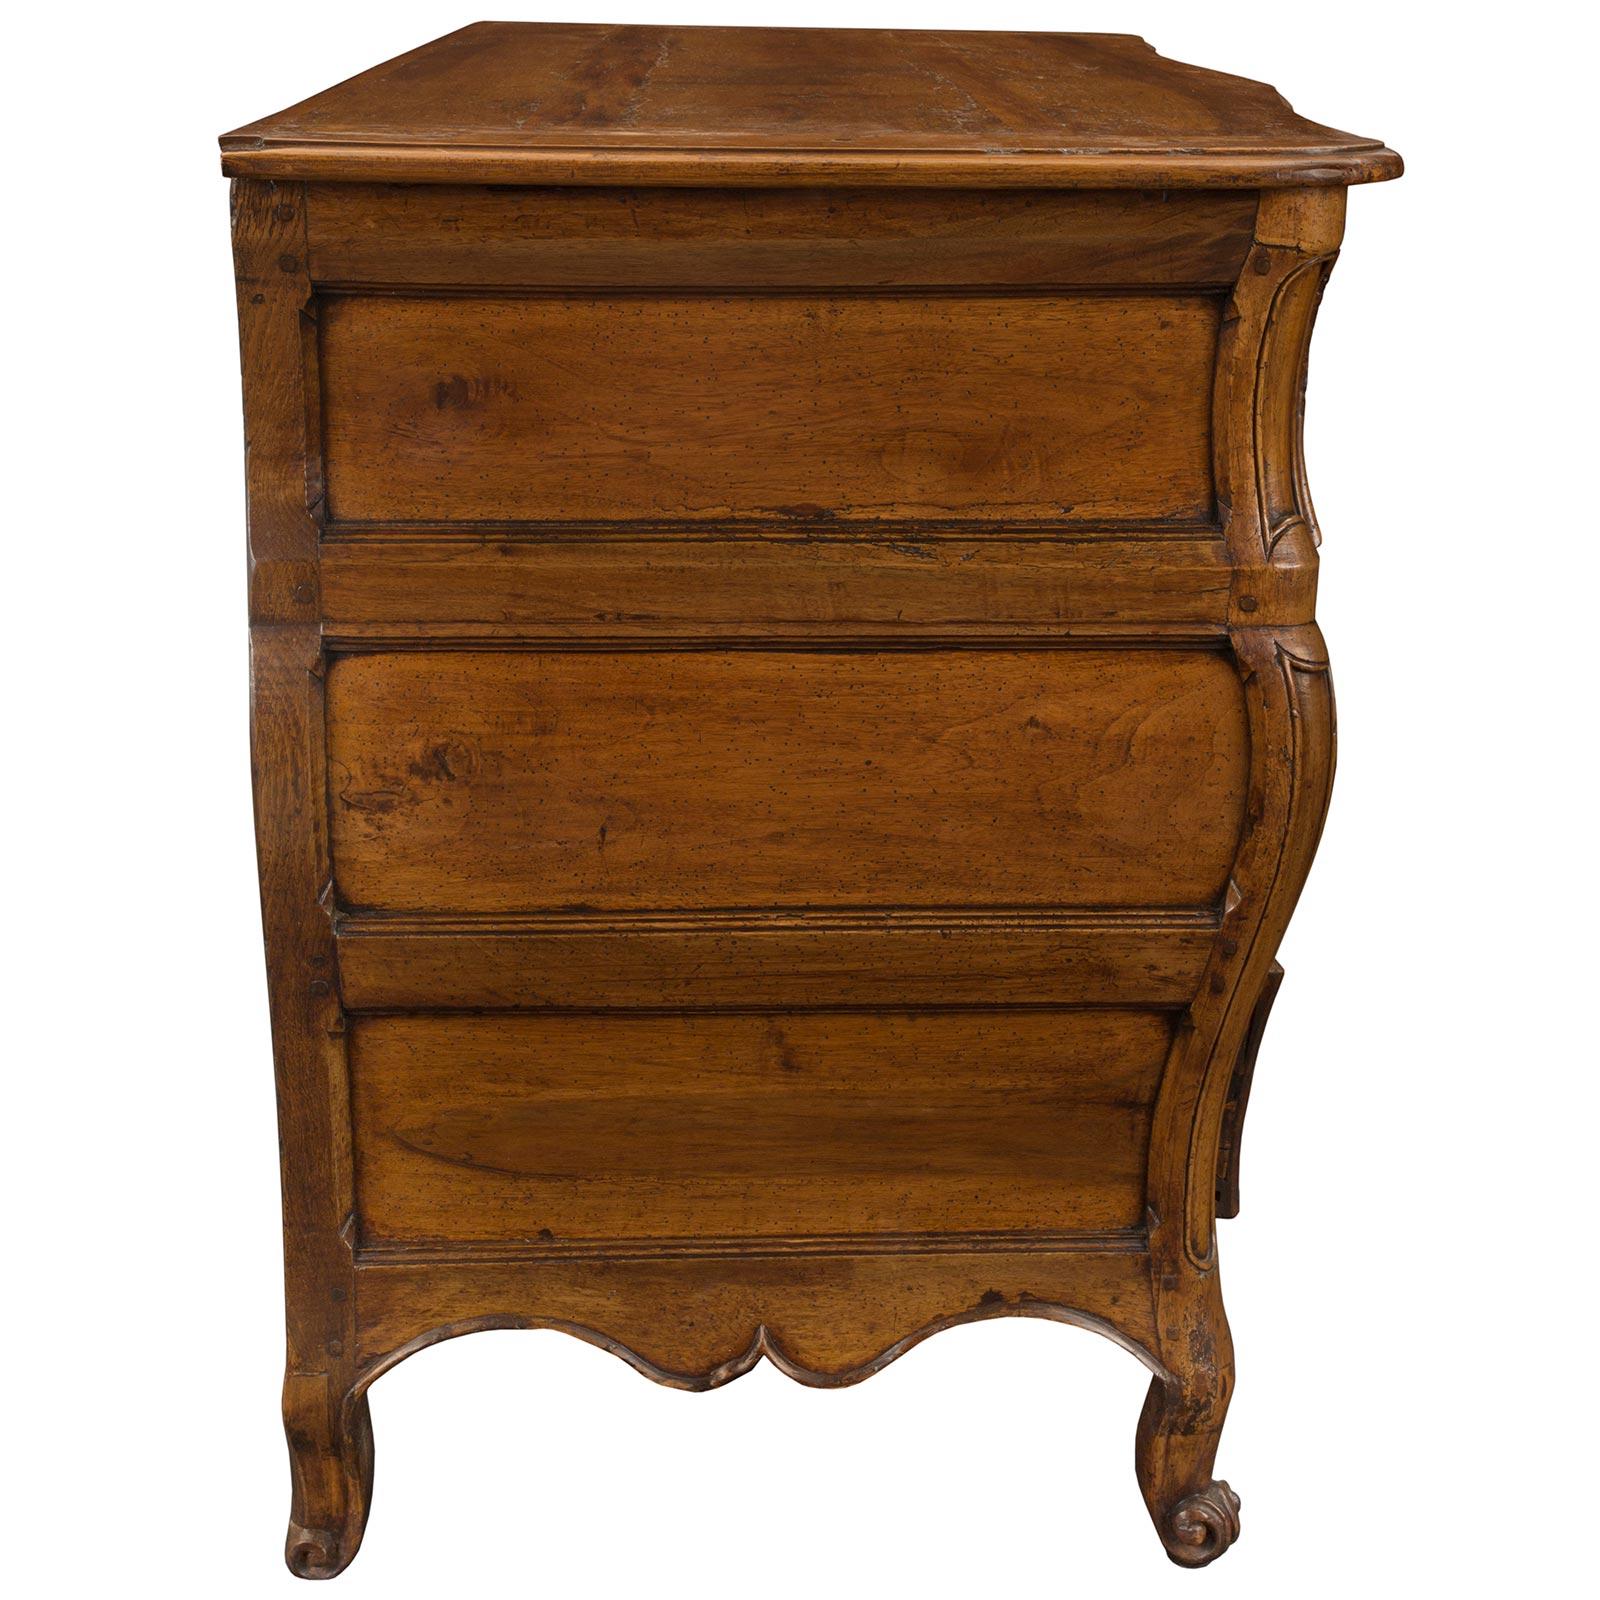 French Mid-18th Century Louis XV Period Walnut Commode with Bronze Hardware For Sale 3